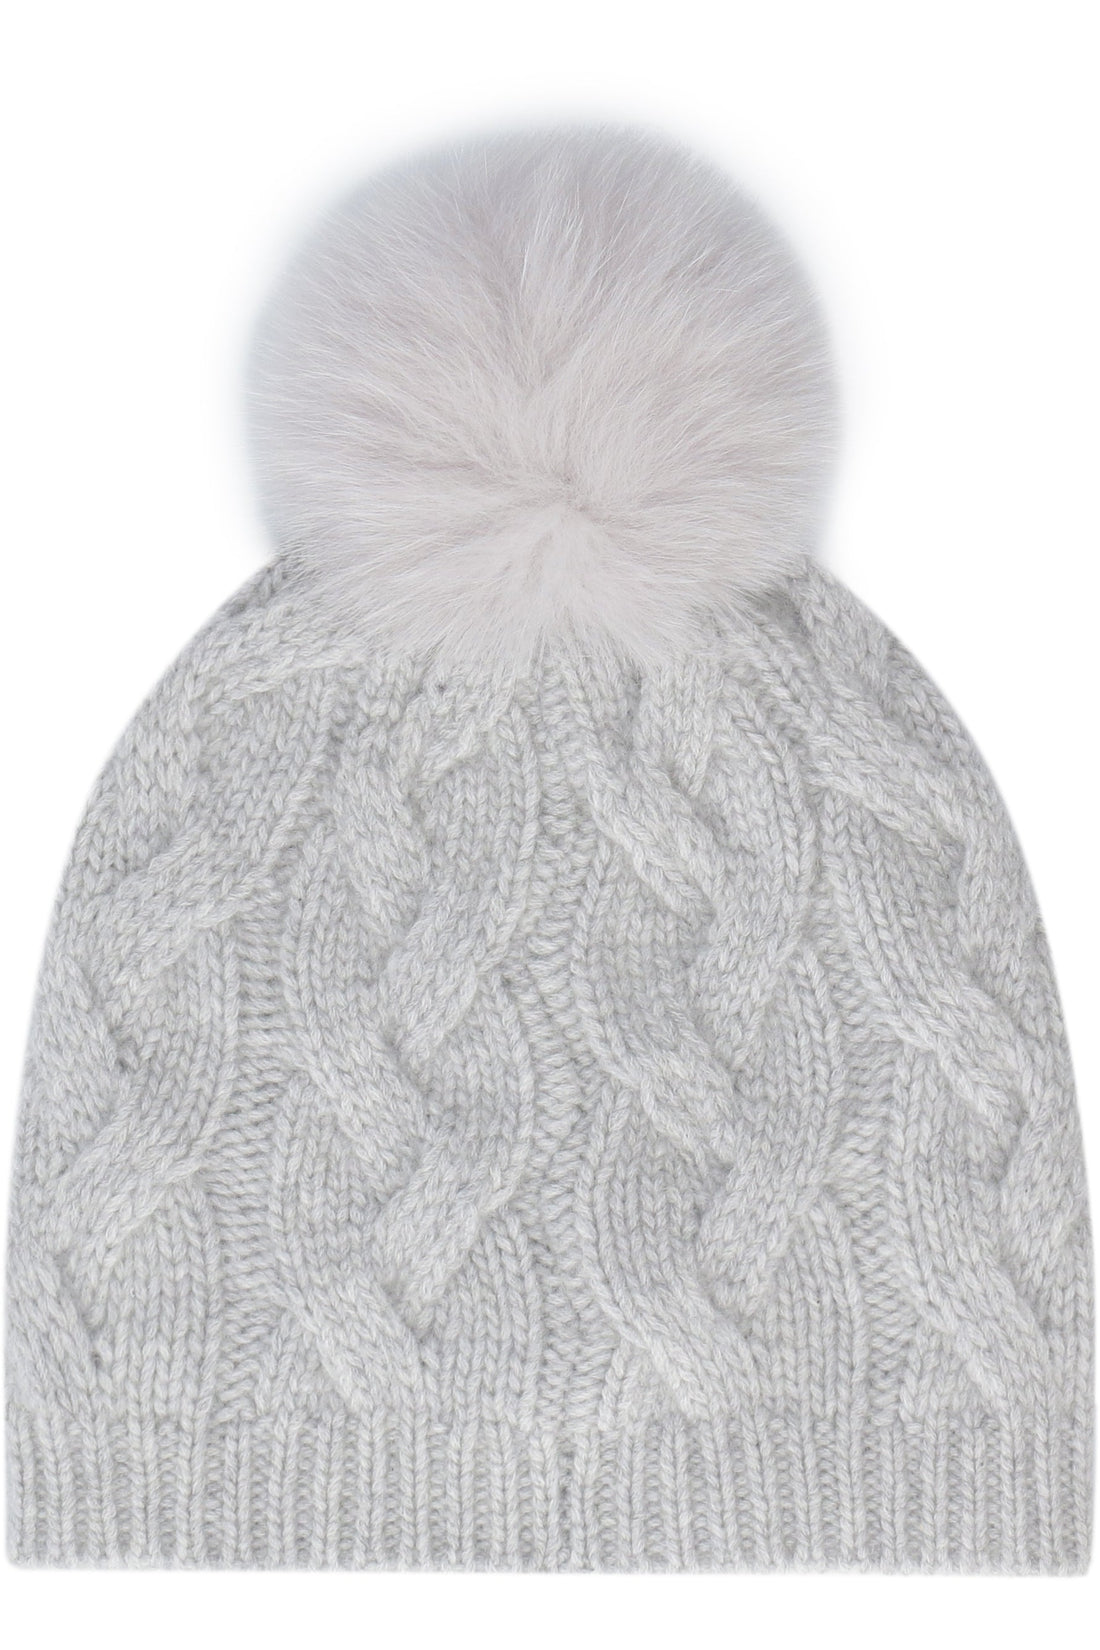 Max Mara-OUTLET-SALE-Knitted wool beanie with pom-pom-ARCHIVIST